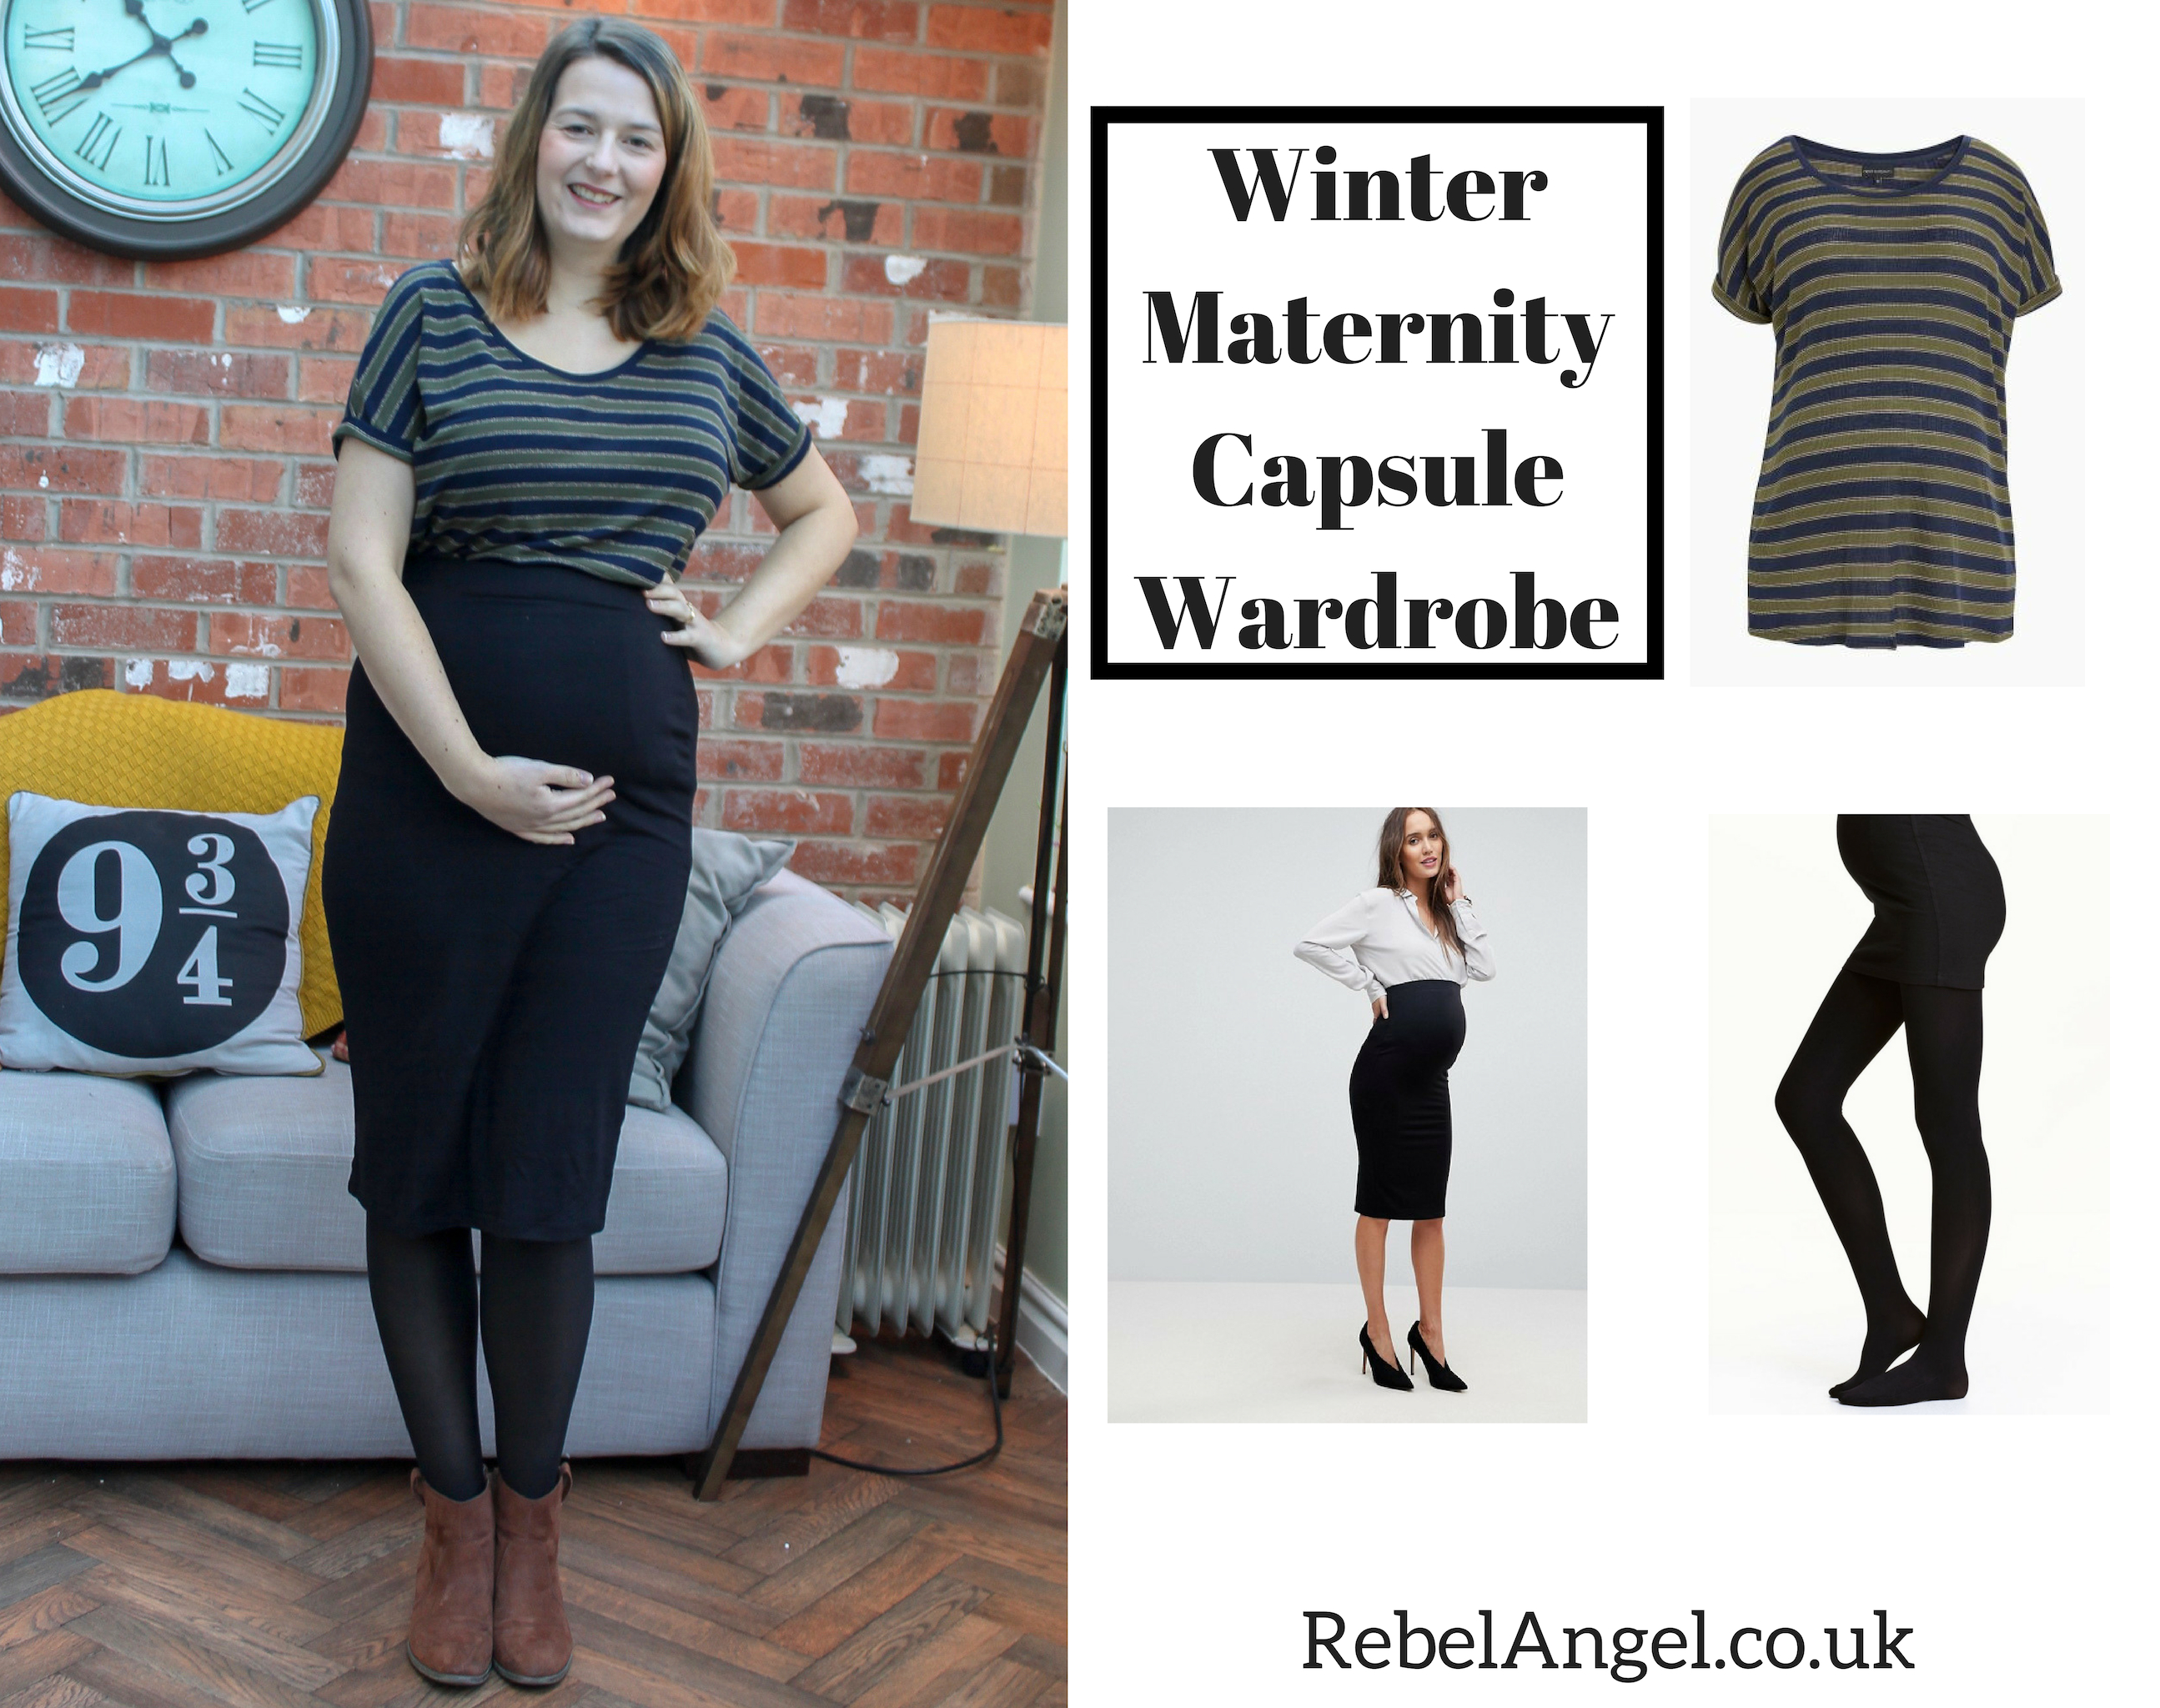 Winter Maternity Capsule Wardrobe outfit with striped top and pencil skirt